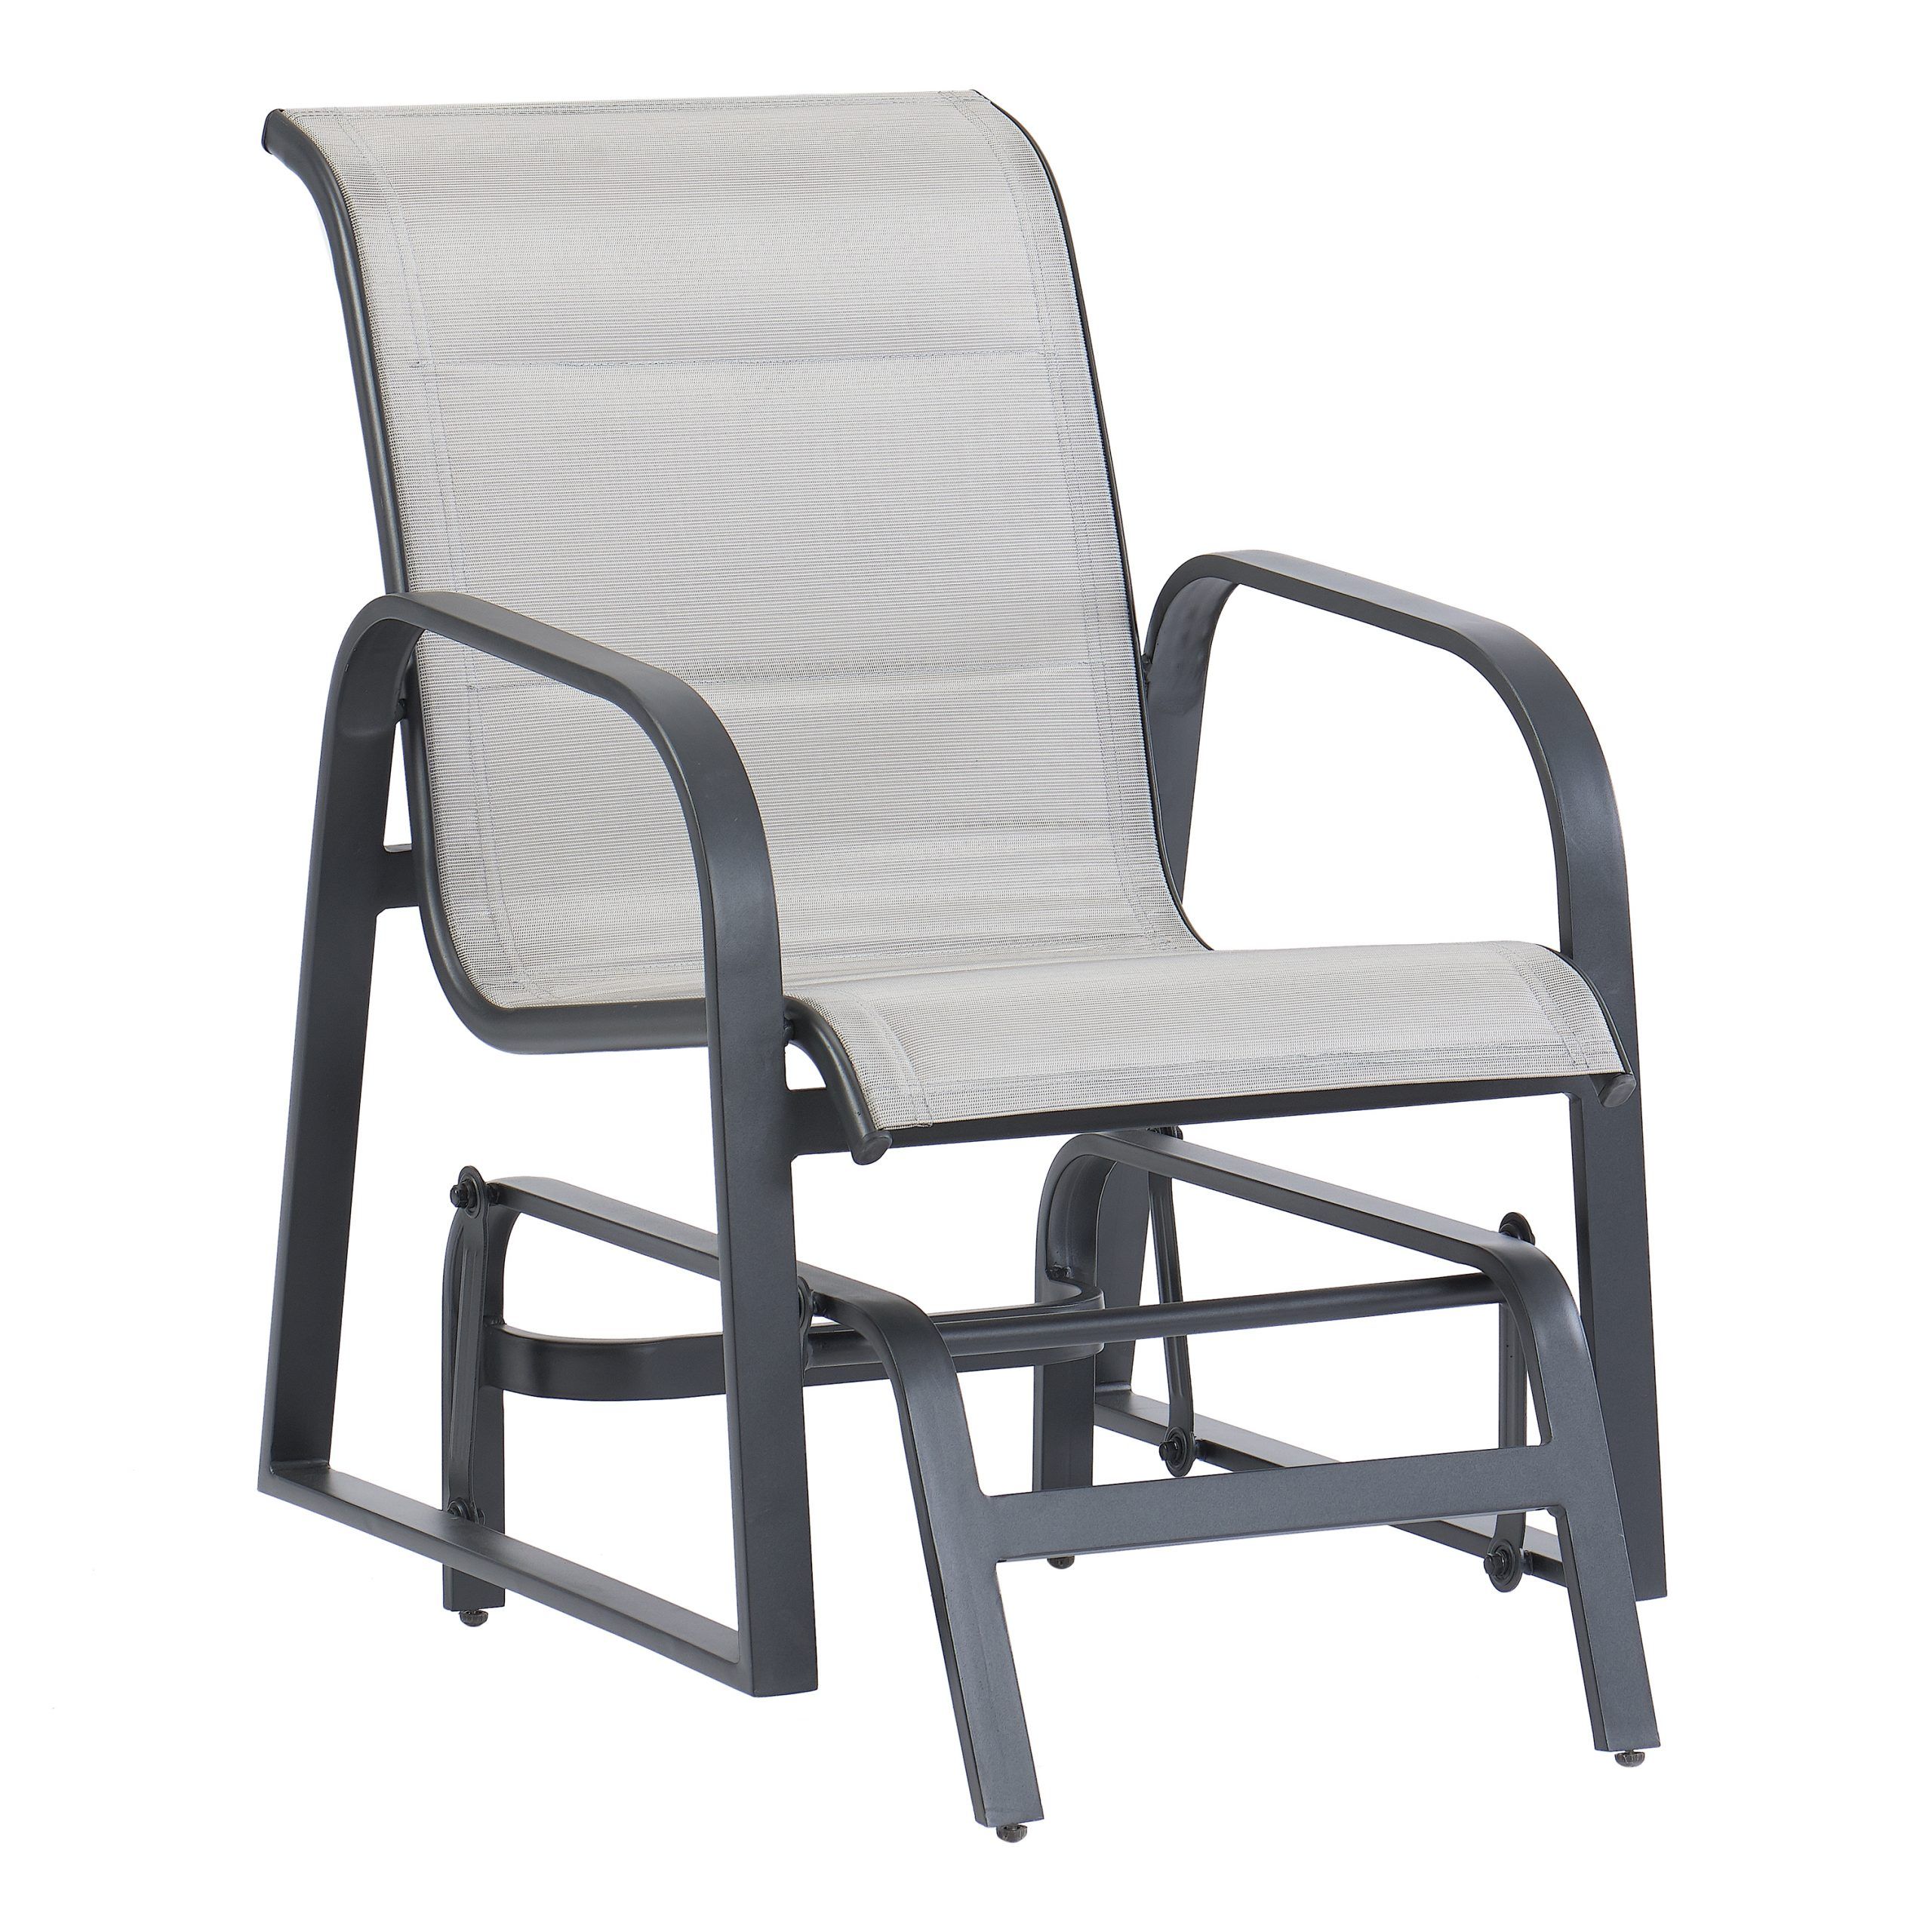 Padded Sling Double Gliders Throughout Best And Newest Better Homes & Gardens Montrose Padded Sling Glider Chair – Walmart (View 13 of 30)